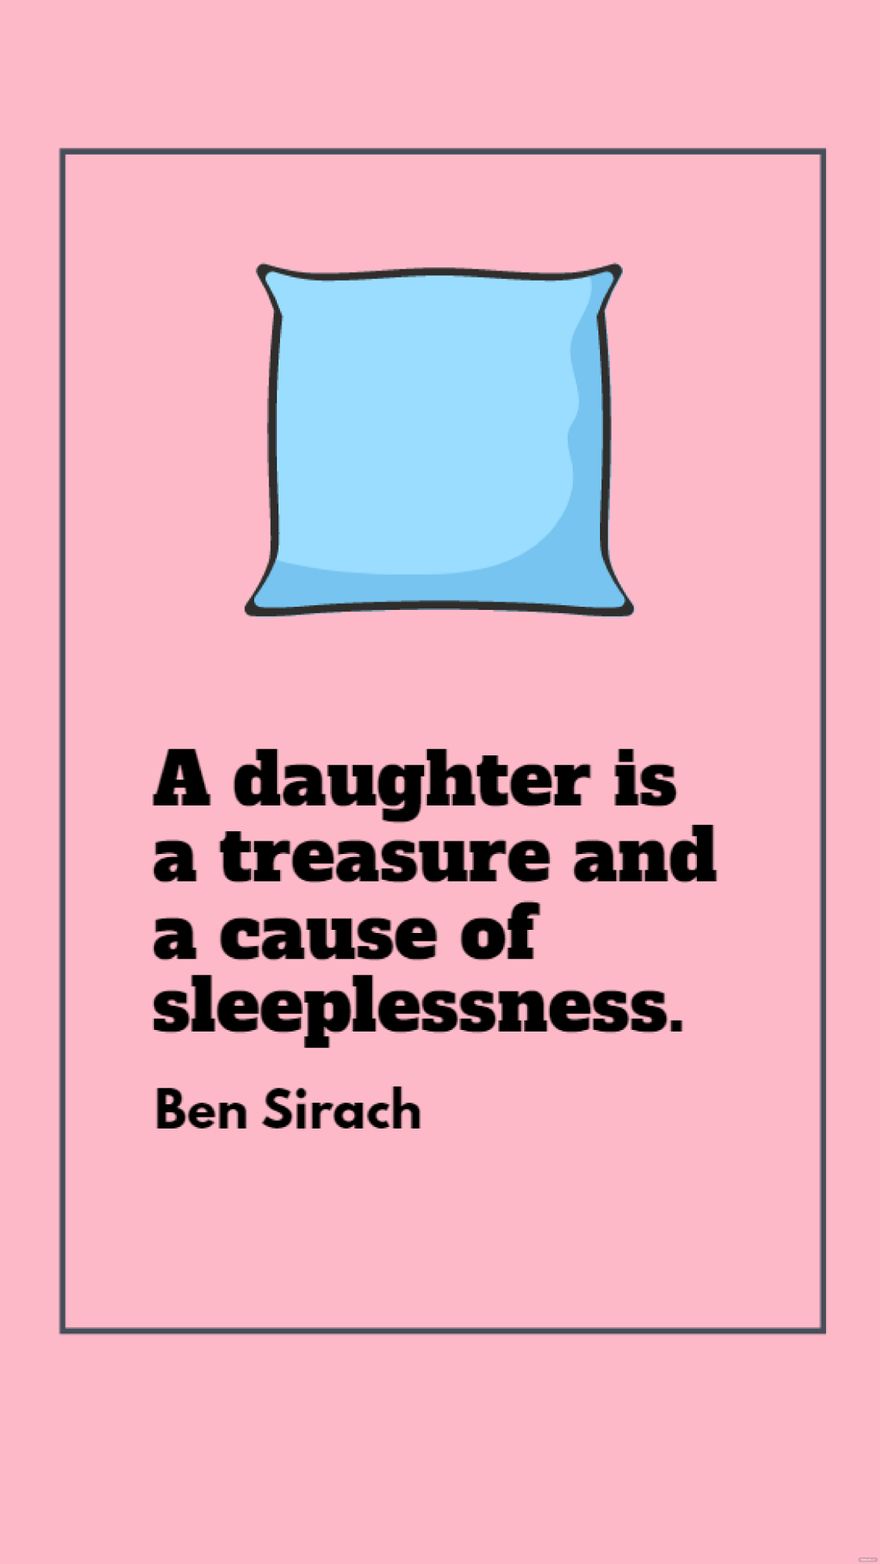 Ben Sirach - A daughter is a treasure and a cause of sleeplessness. in JPG